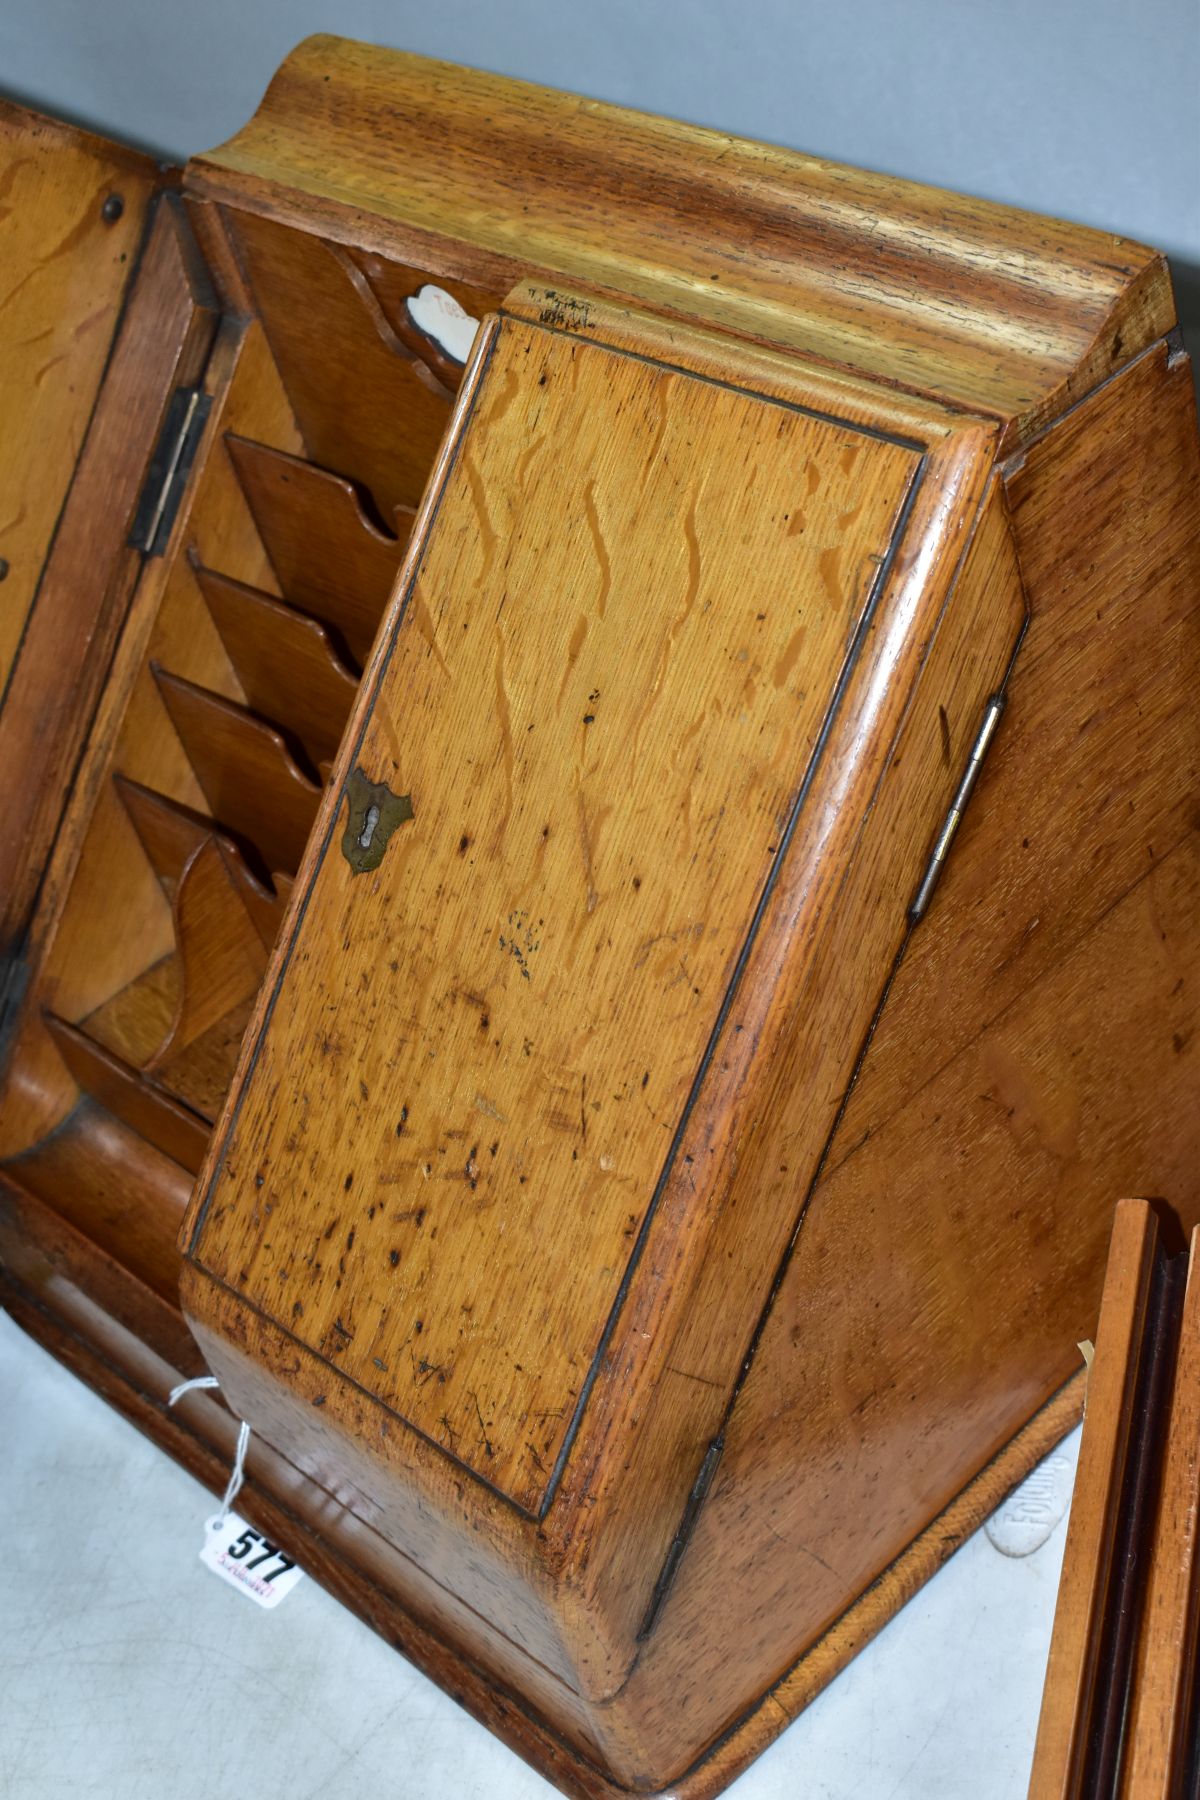 AN EDWARDIAN OAK STATIONERY BOX, hinged top above sloped double doors opening to reveal a fitted - Image 5 of 7